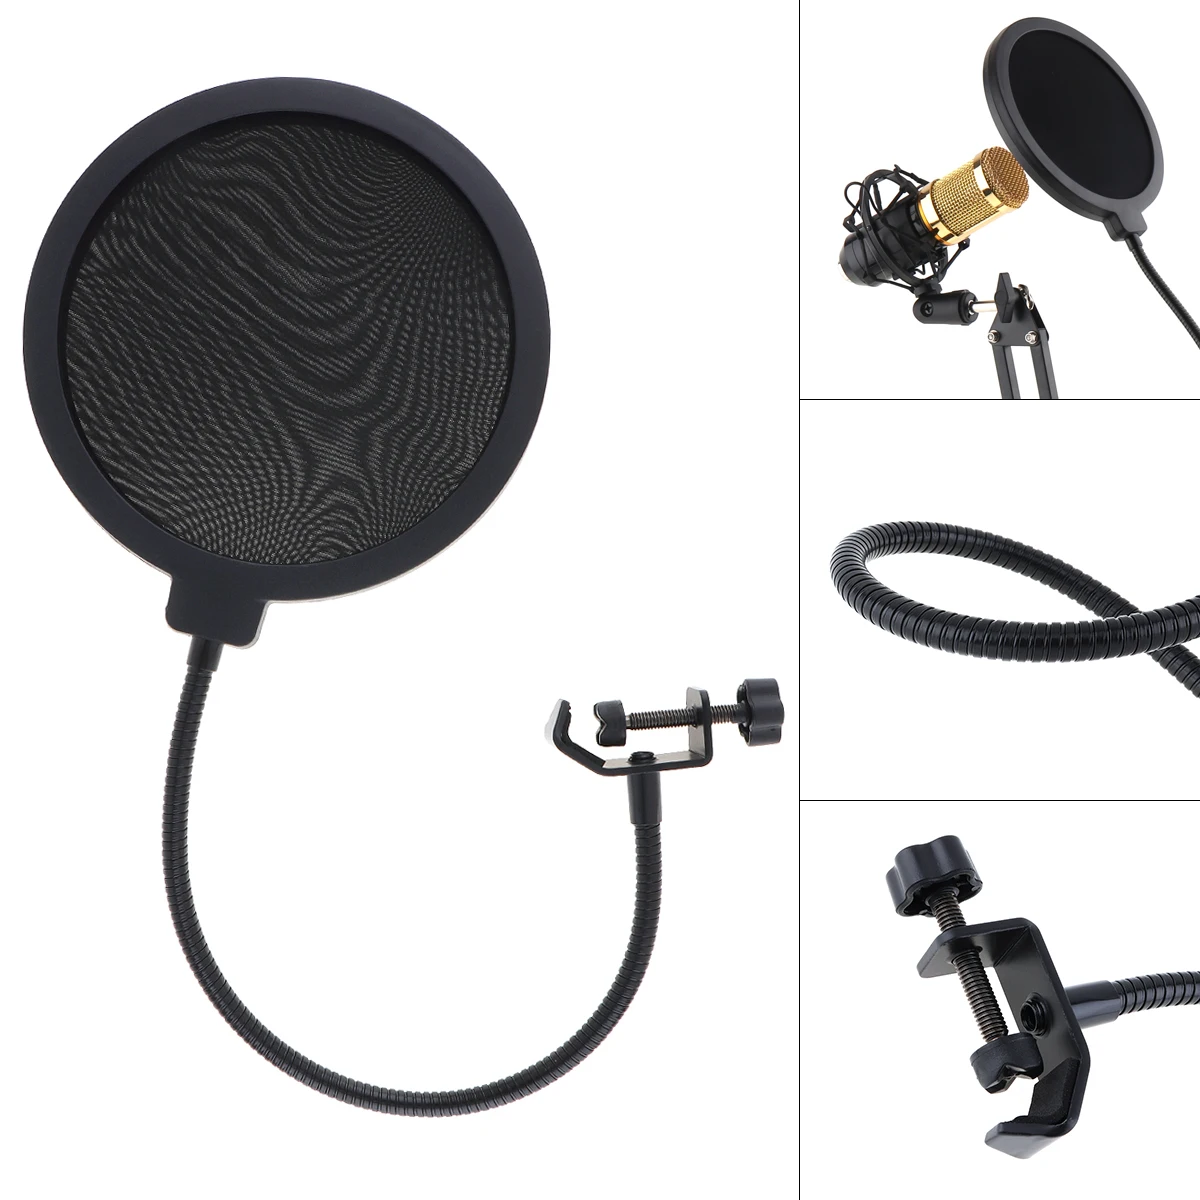 Double Layer Studio Microphone Flexible Wind Screen Mask Mic Pop Filter Shield for Speaking Recording Accessories Mic Pop Filter